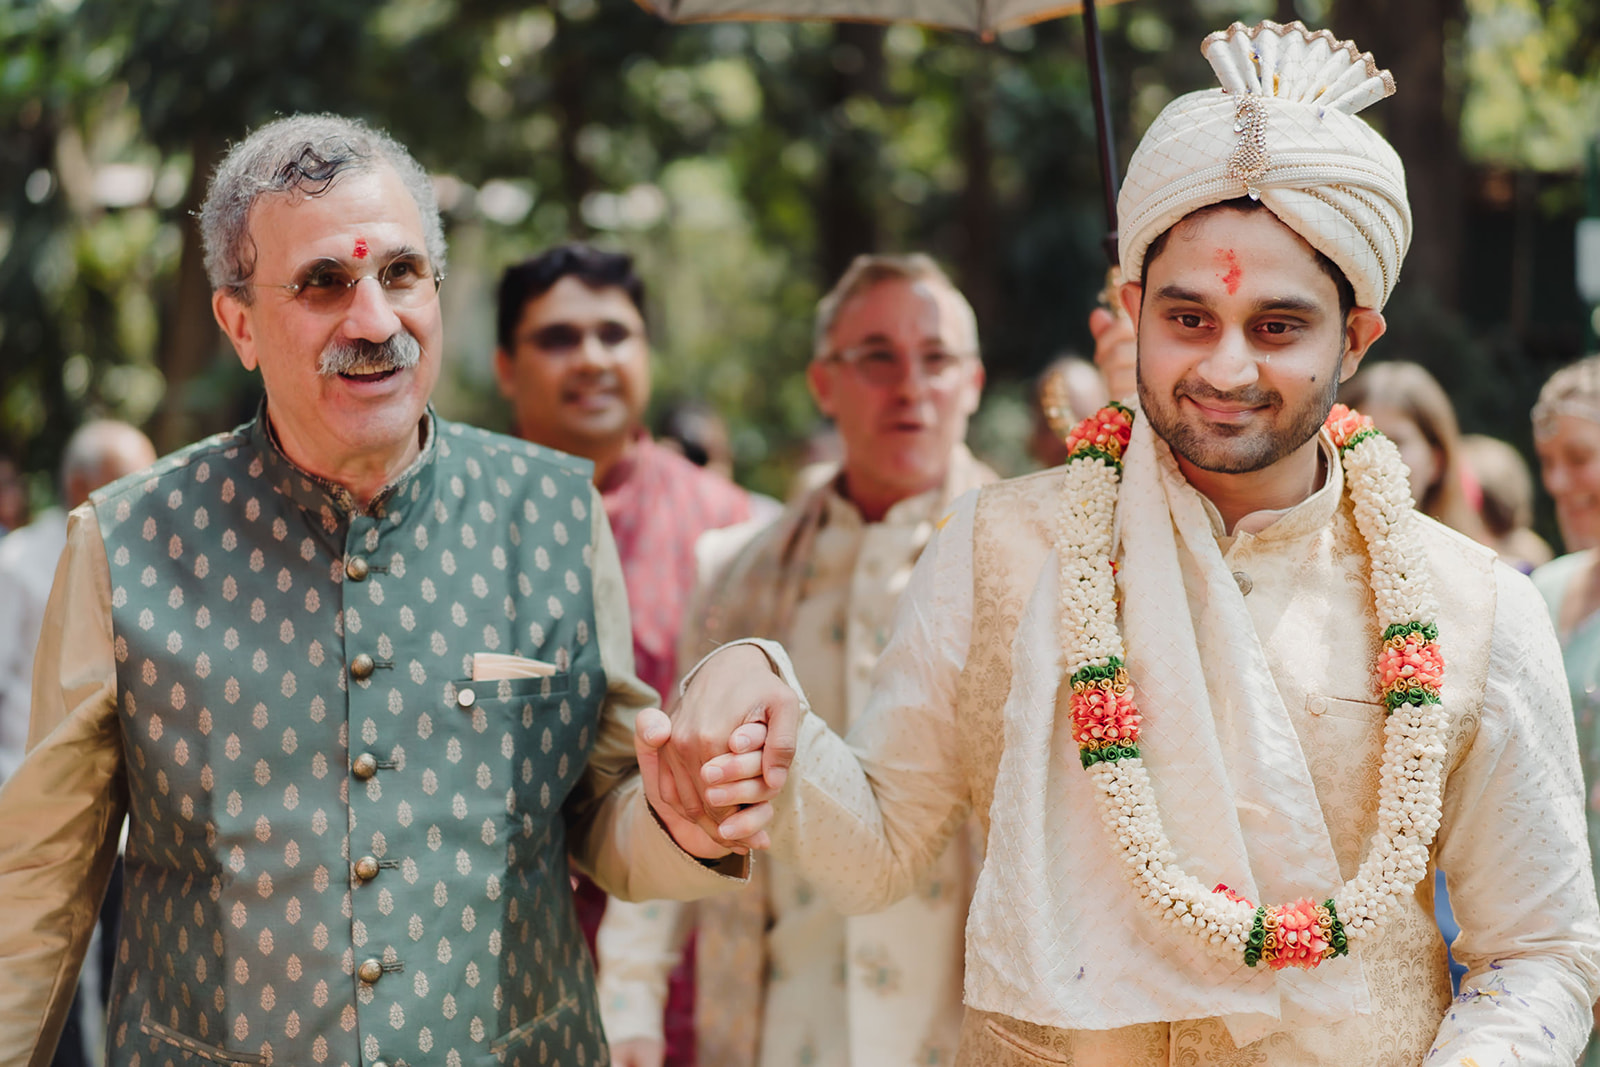 Groom escorted by his father-in-law into the mandap